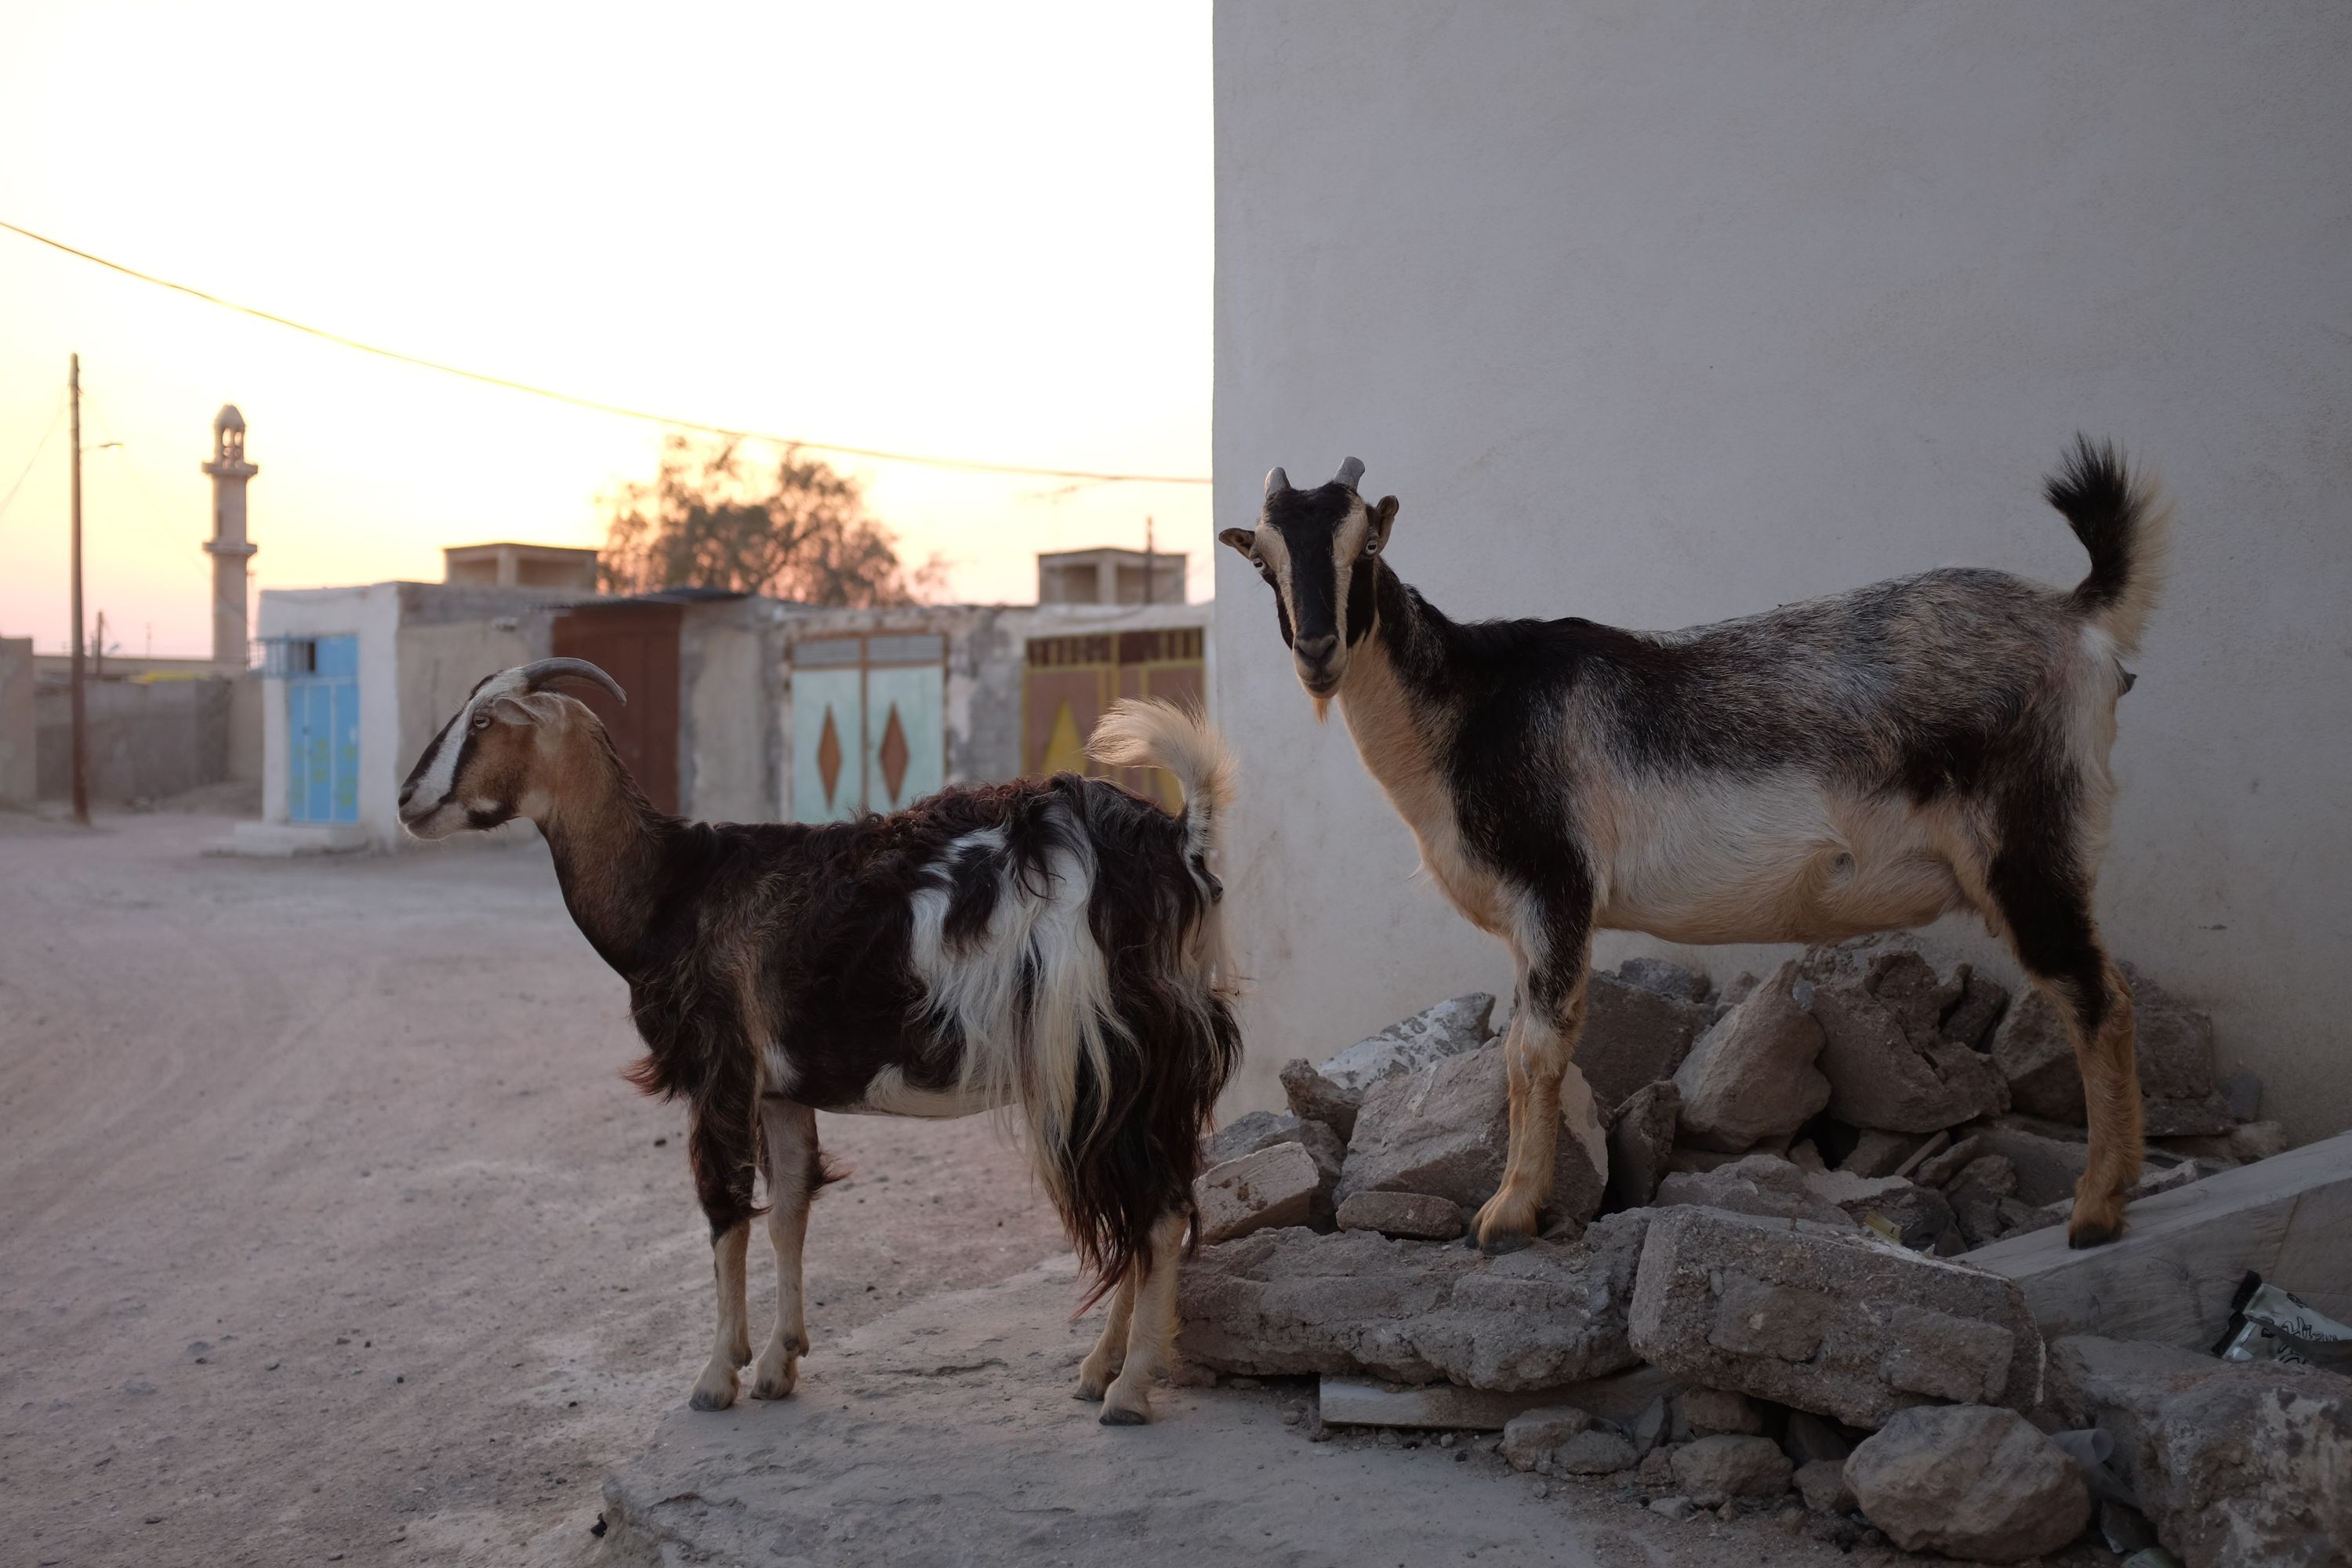 Two goats stand by a wall in an Arabic-looking village.